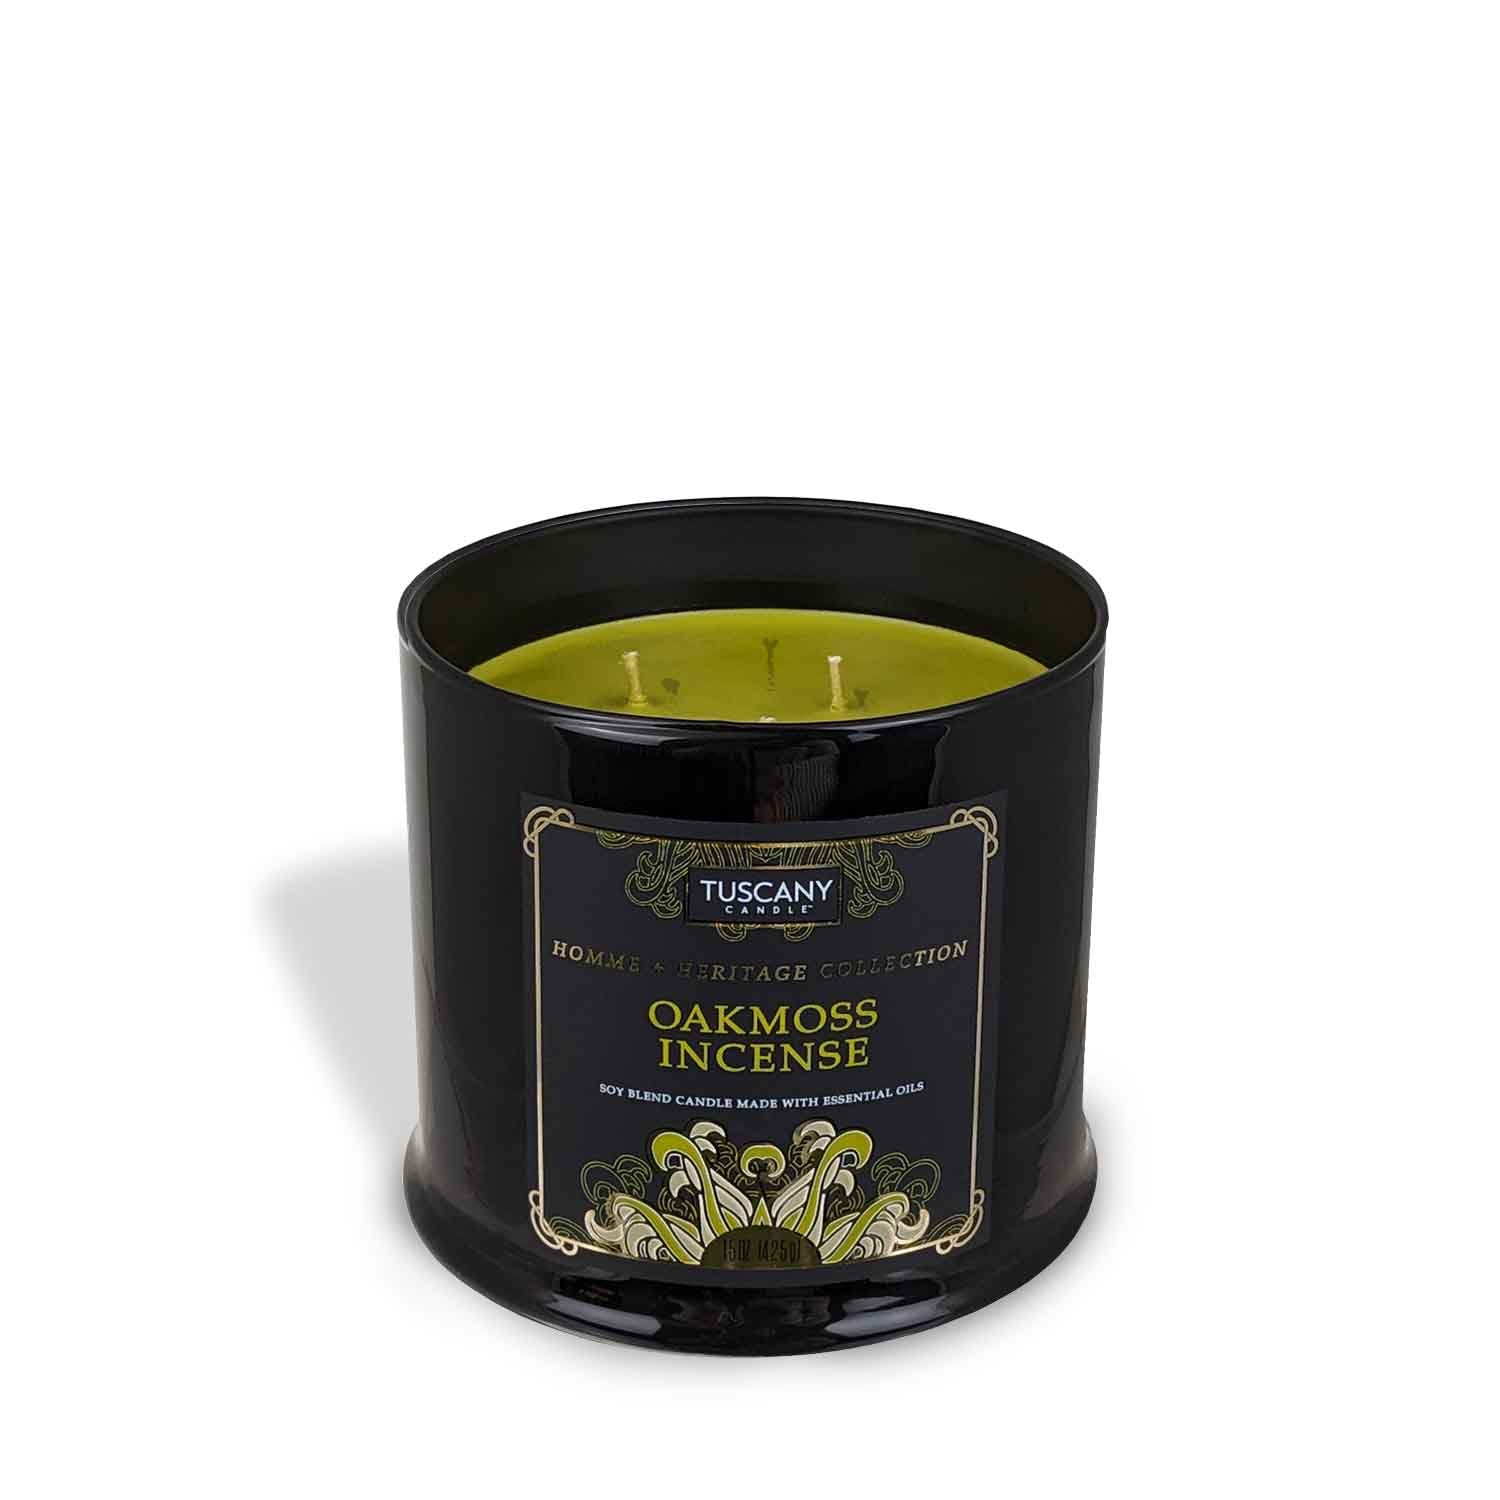 A Tuscany Candle Oakmoss Incense Scented Jar Candle (15 oz) – Homme + Heritage Collection in a black tin on a white background.